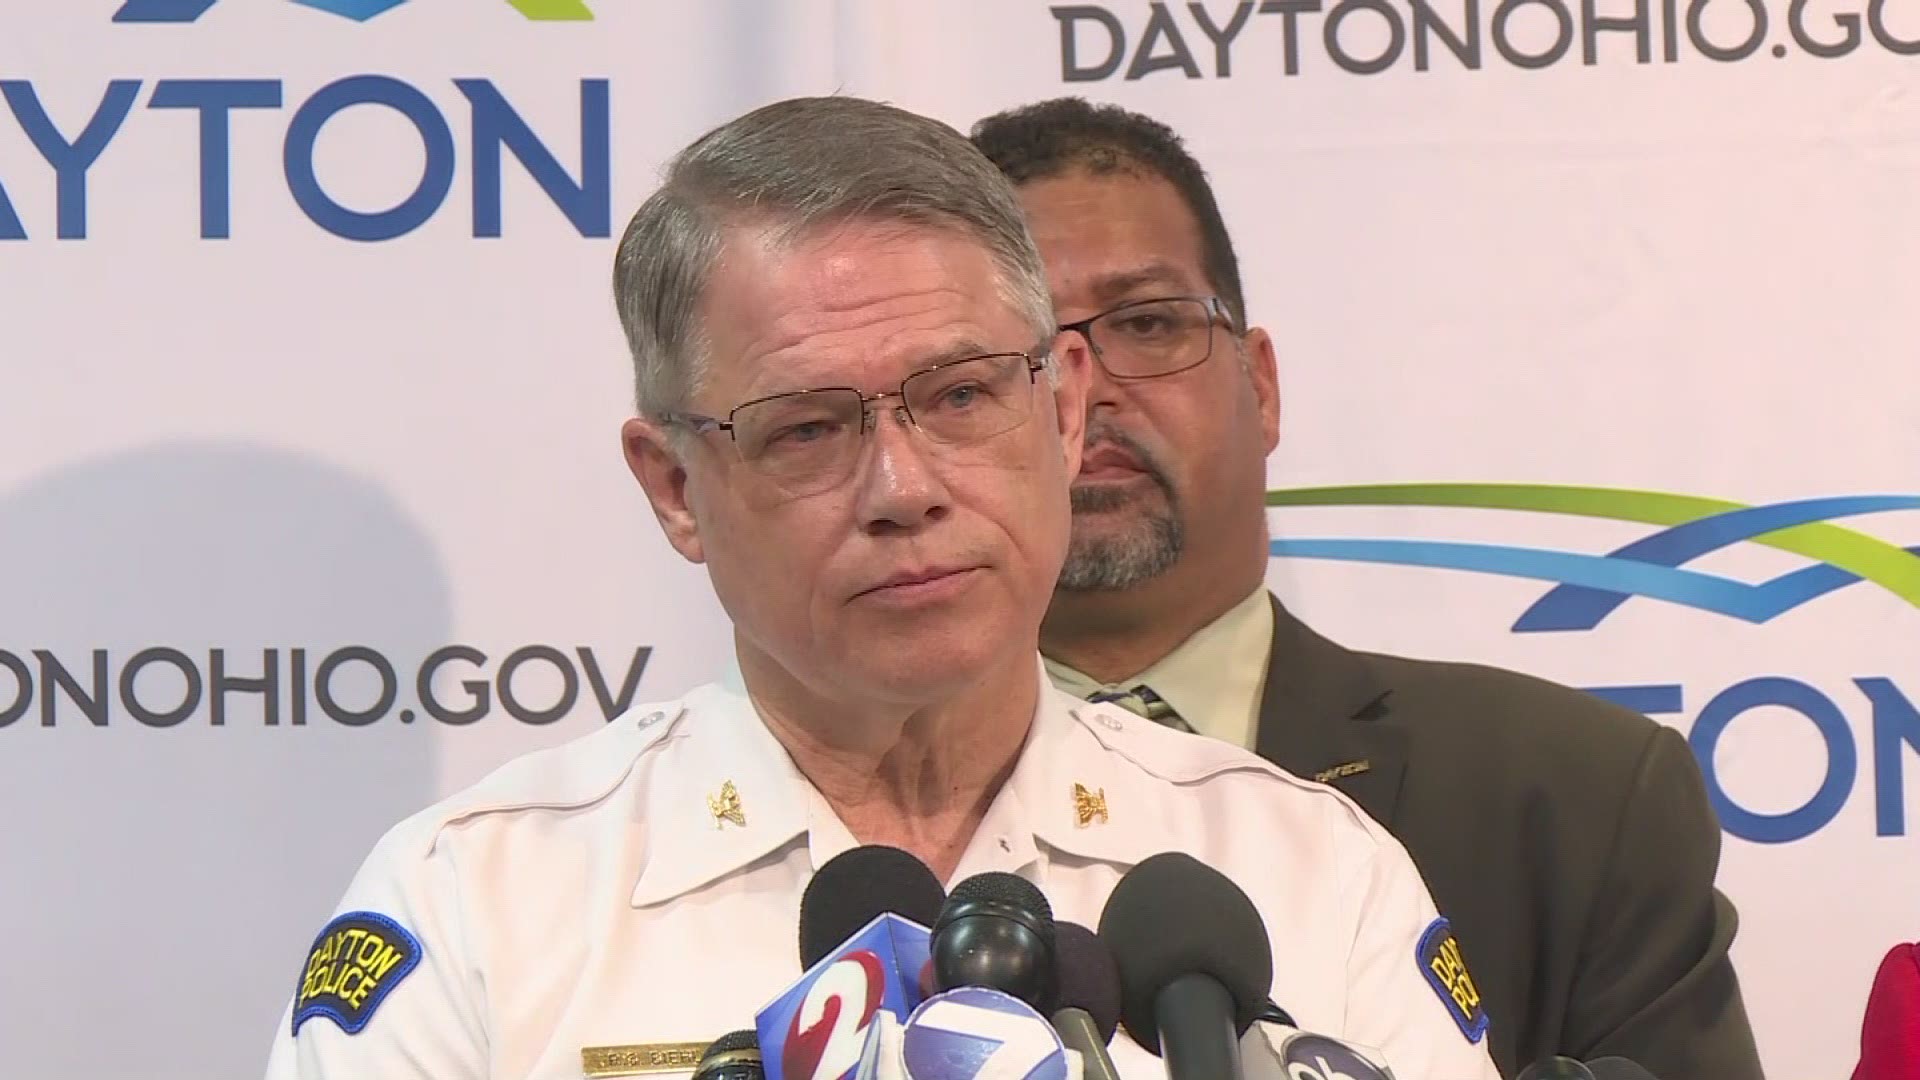 Dayton Police Chief Richard Biehl called it 'problematic' that alleged Dayton shooter Connor Betts was able to access a high level of weaponry.